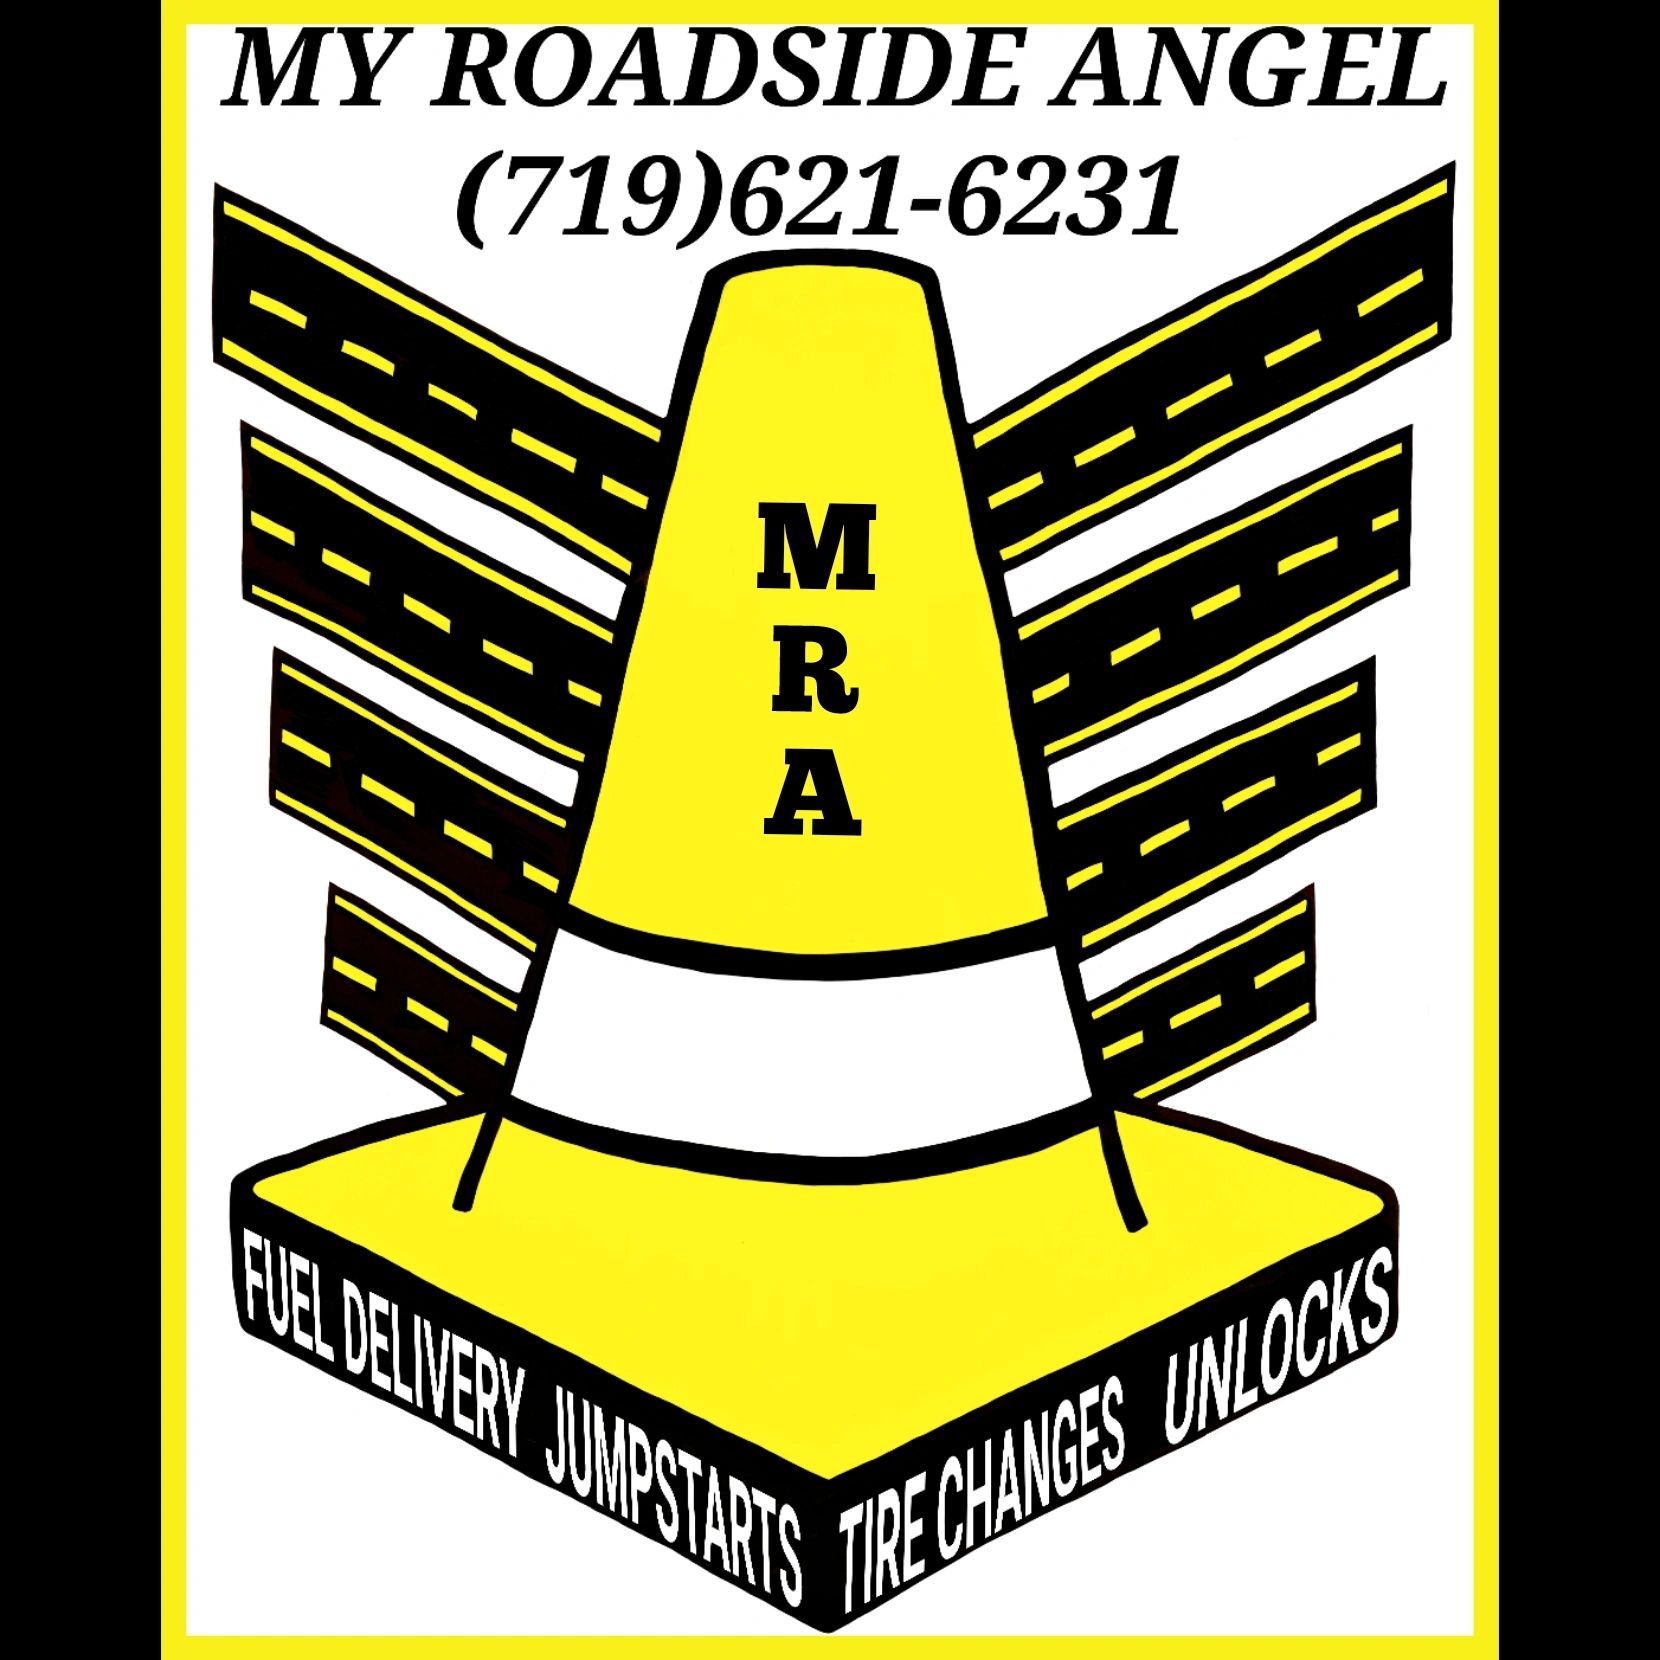 My Roadside Angel Fast and Affordable Towing Service in Colorado Springs. 